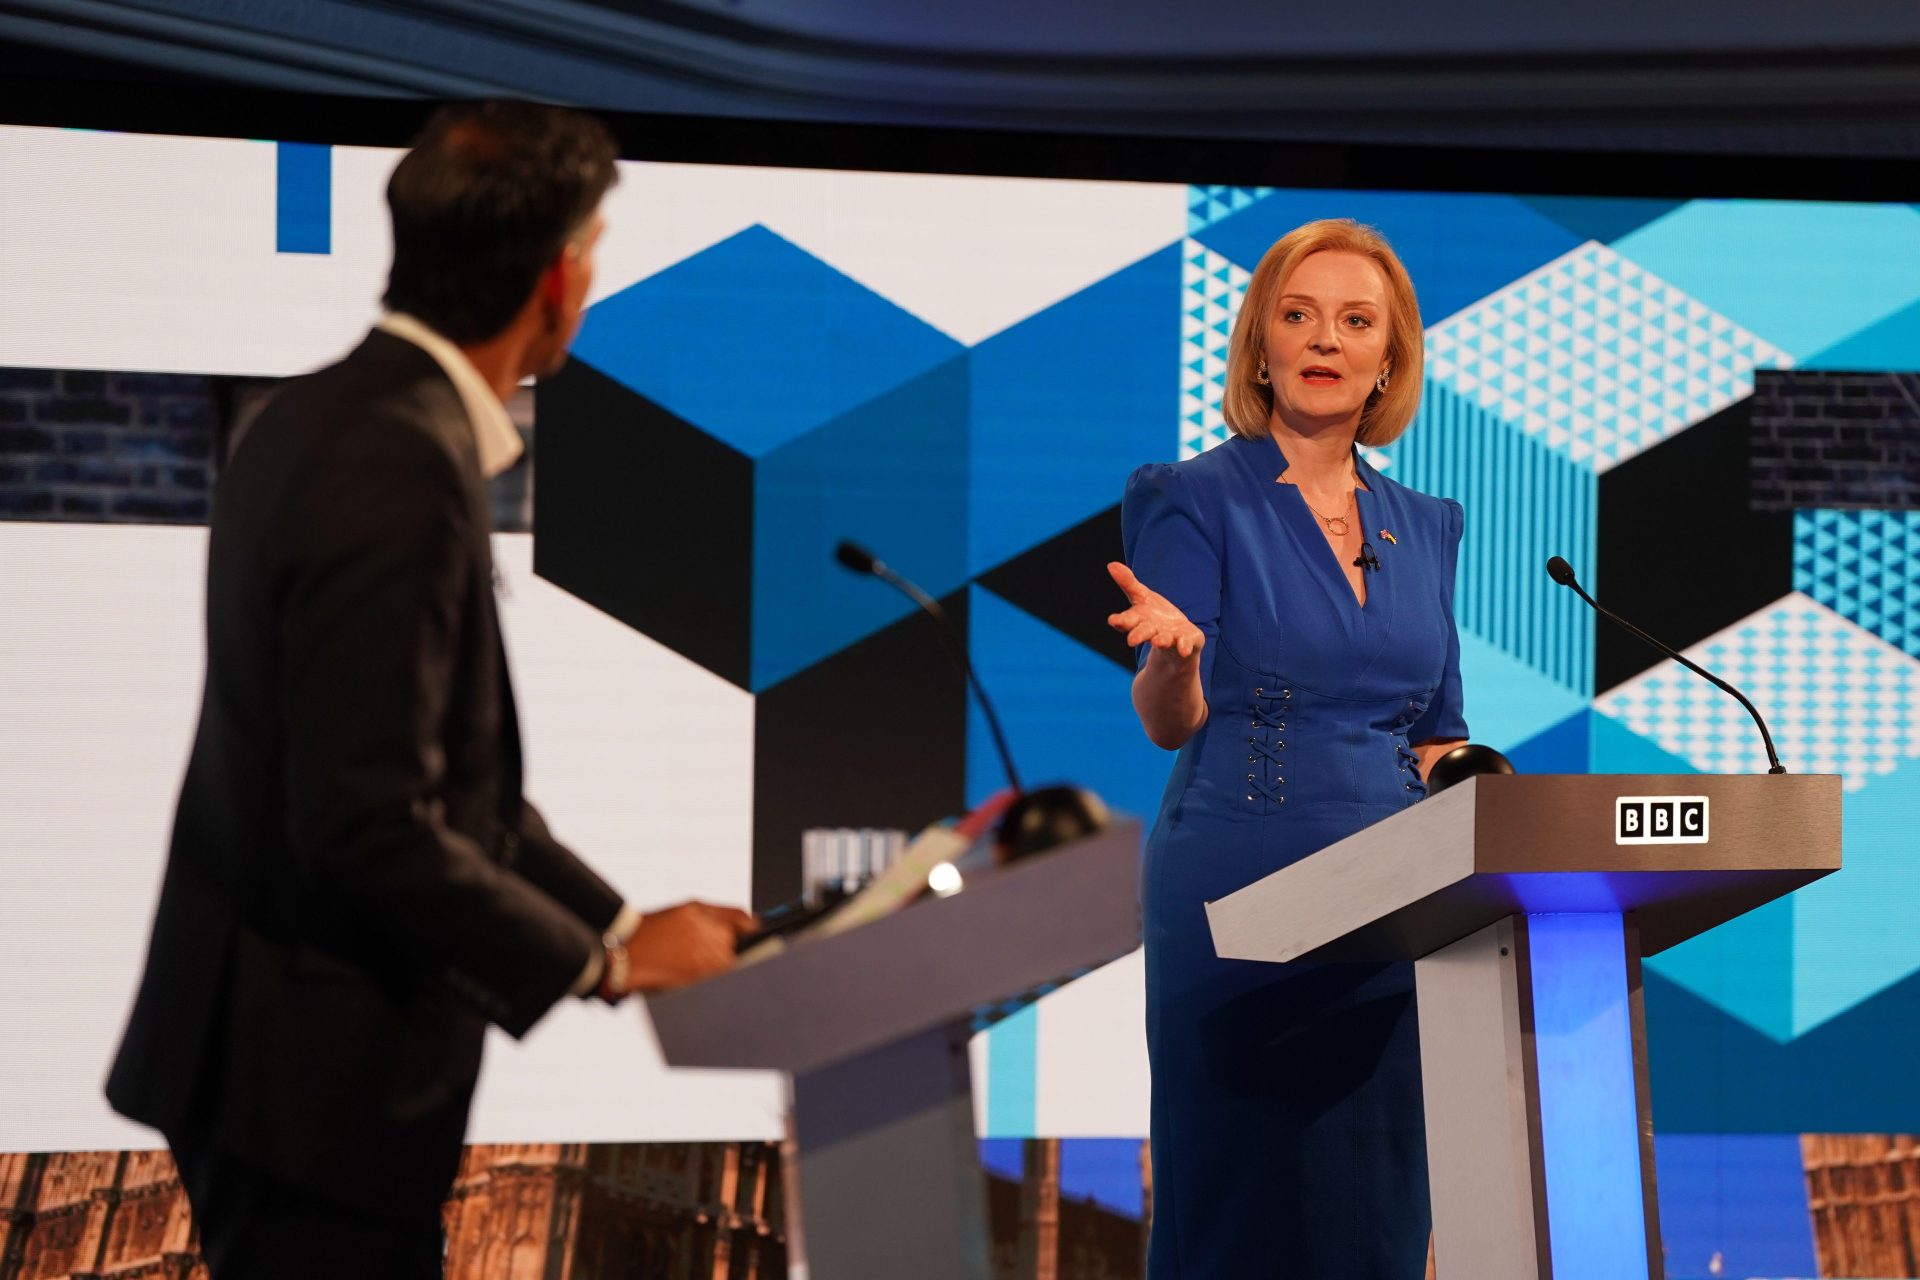 2JJEJTG Rishi Sunak and Liz Truss taking part in the BBC Tory leadership debate, Our Next Prime Minister, presented by Sophie Raworth, a head-to-head debate at Victoria Hall in Hanley, Stoke-on-Trent, between the Conservative party leadership candidates. Picture date: Monday July 25, 2022.